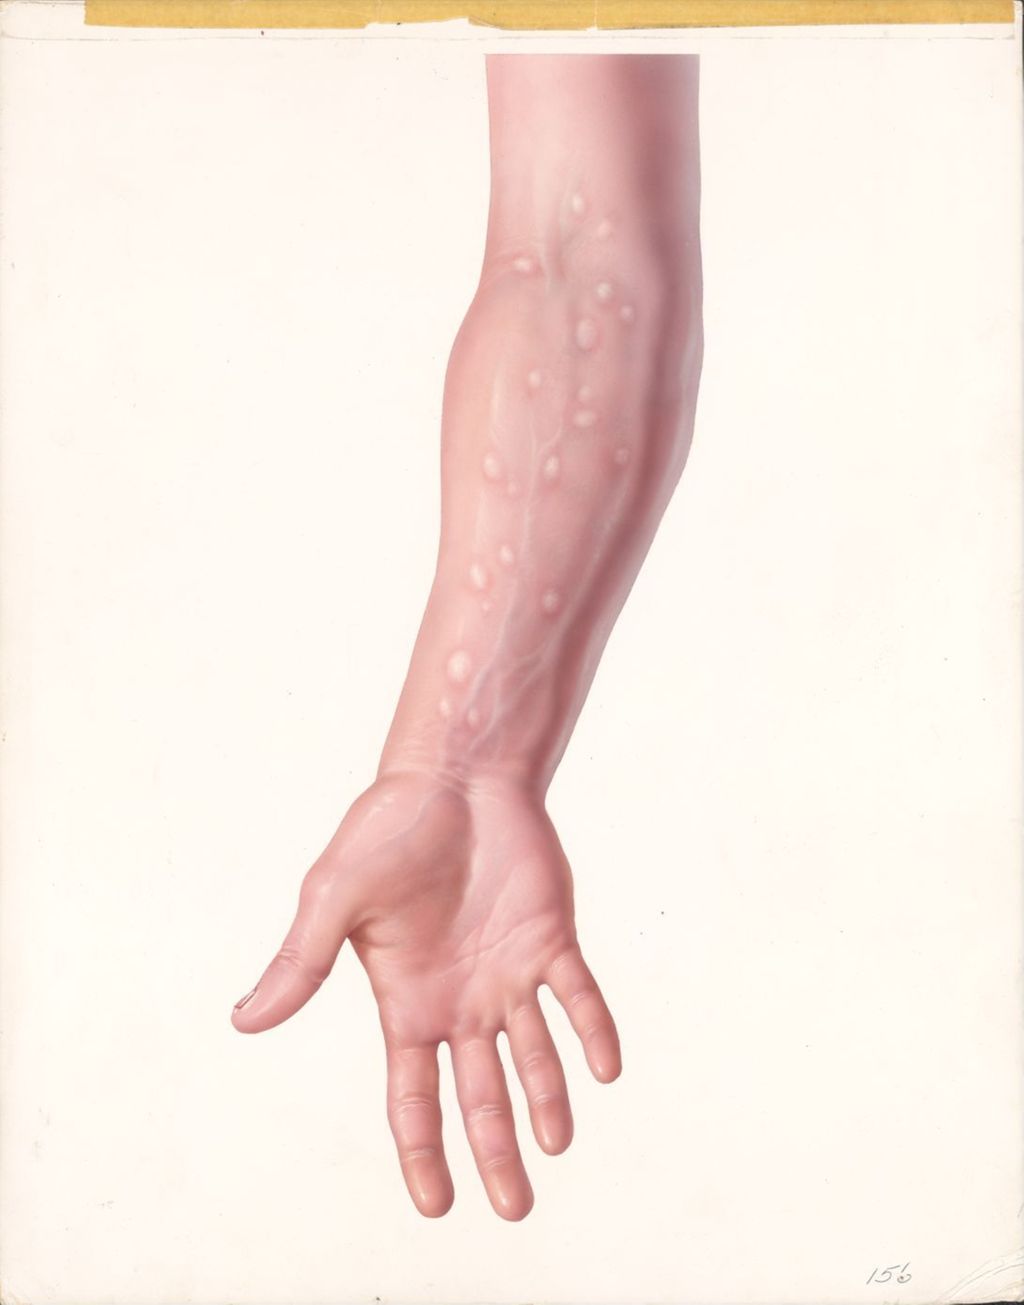 Miniature of Artwork of arm with veins showing and unknown lumps on arm